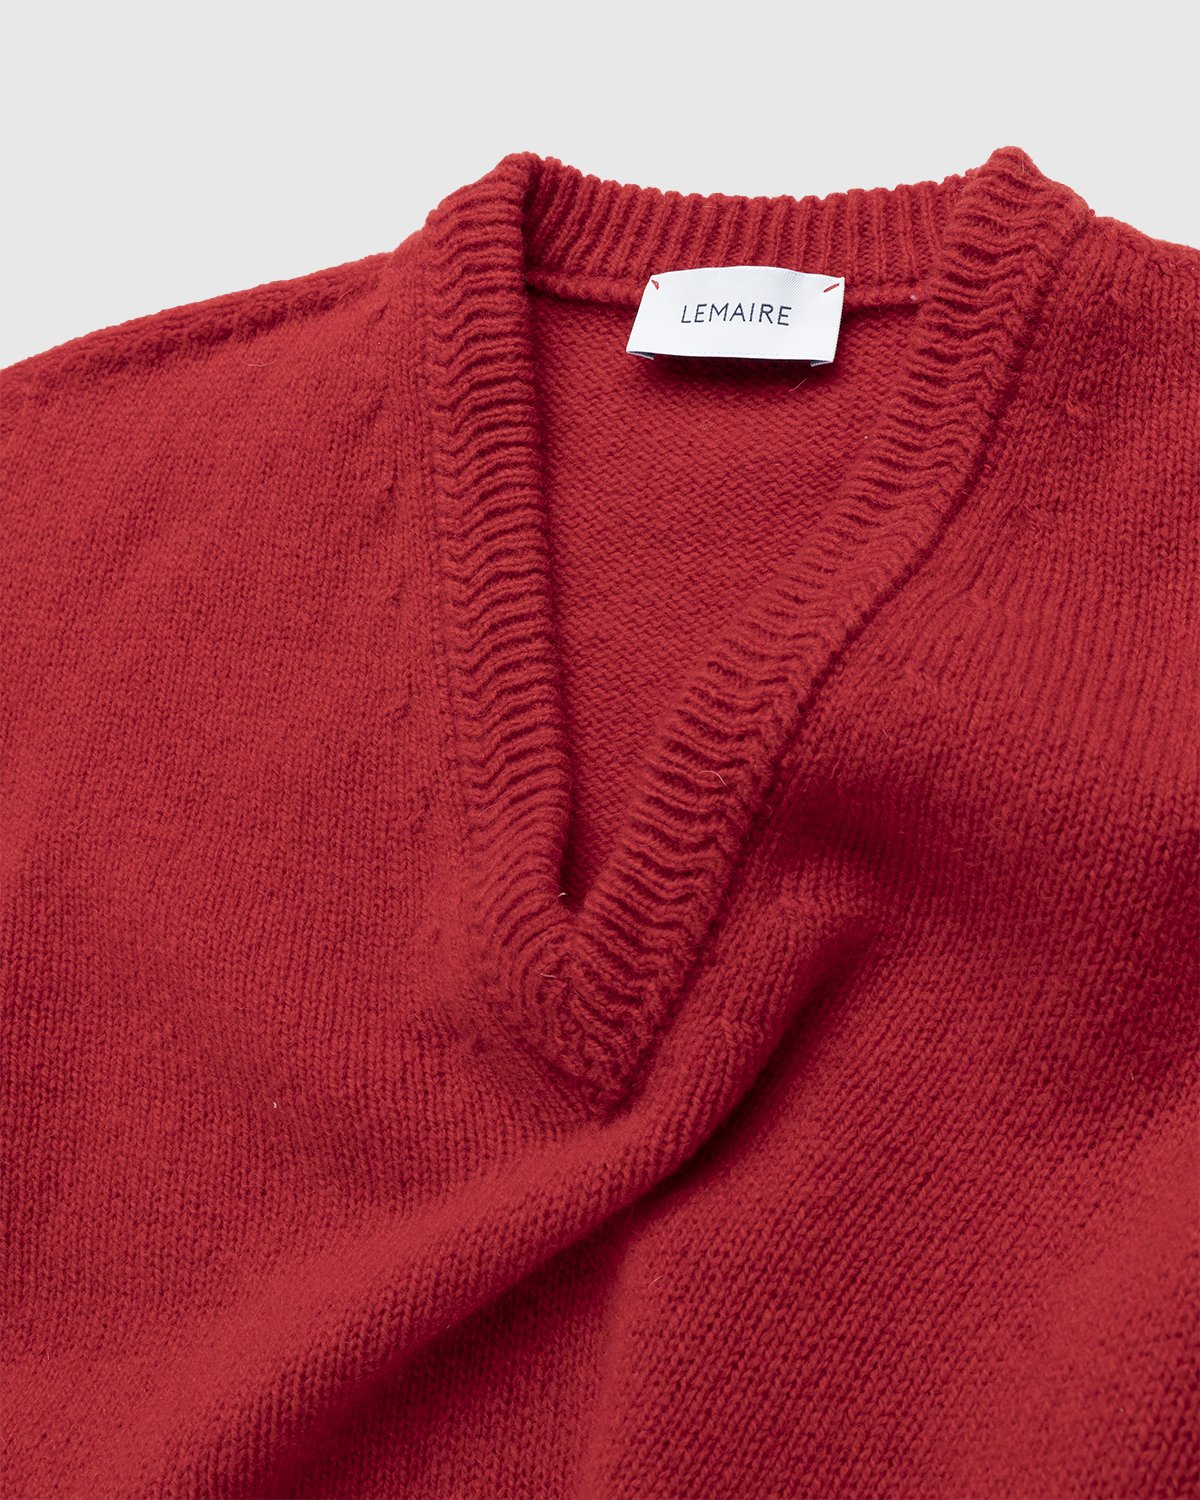 Lemaire - Seamless Shetland Wool V-Neck Sweater Poppy Red - Clothing - Red - Image 3